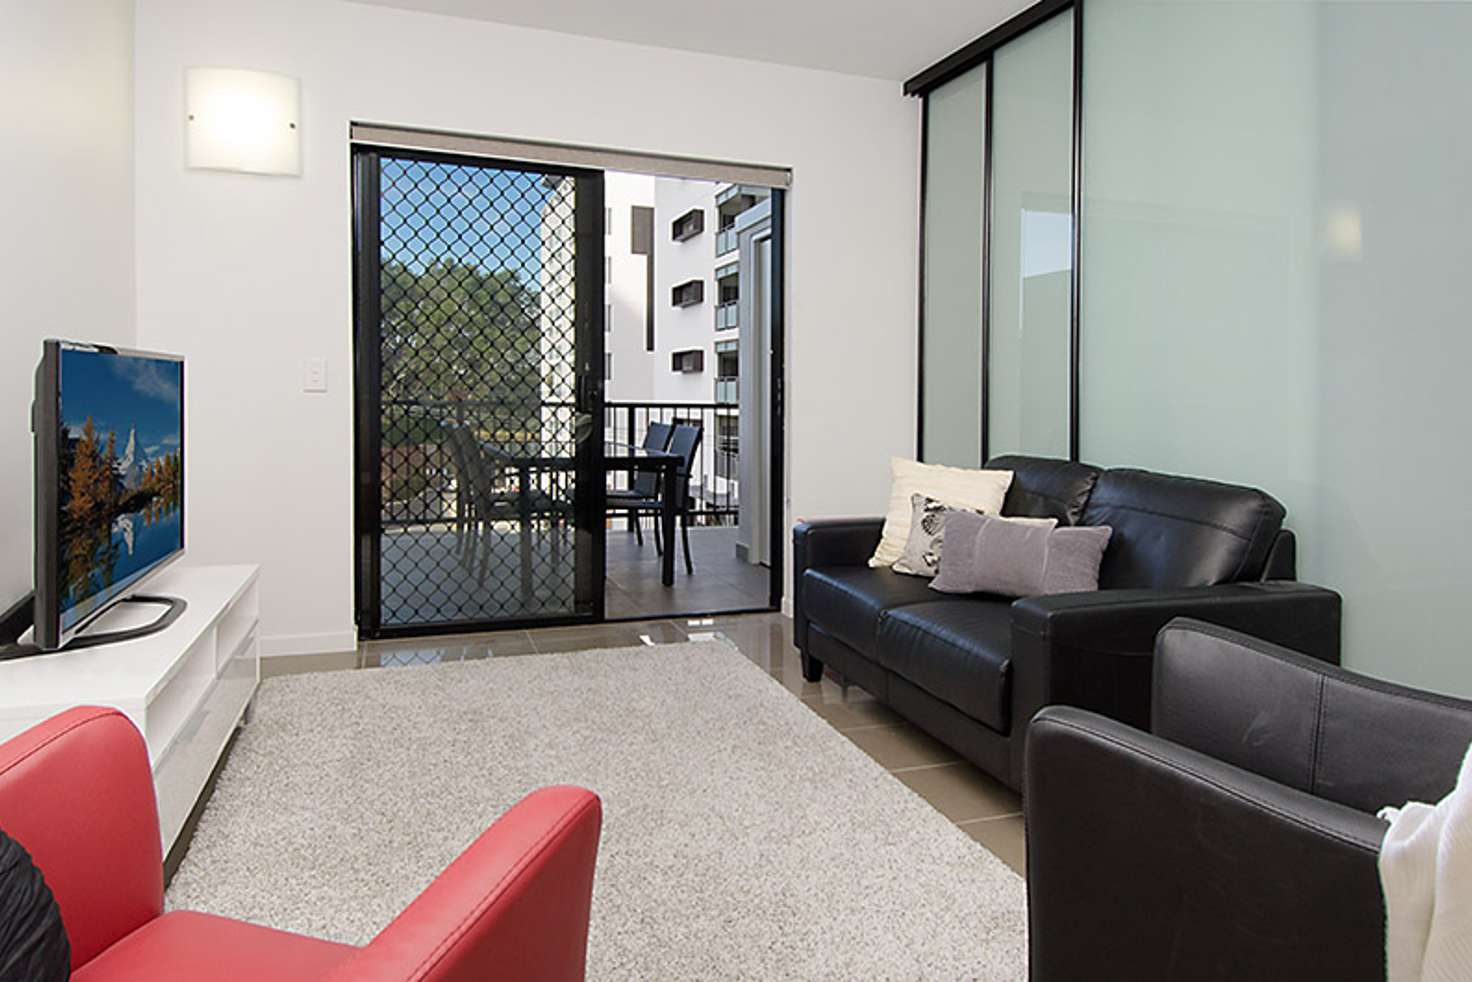 Main view of Homely apartment listing, 14/1 Hurworth Street, Bowen Hills QLD 4006